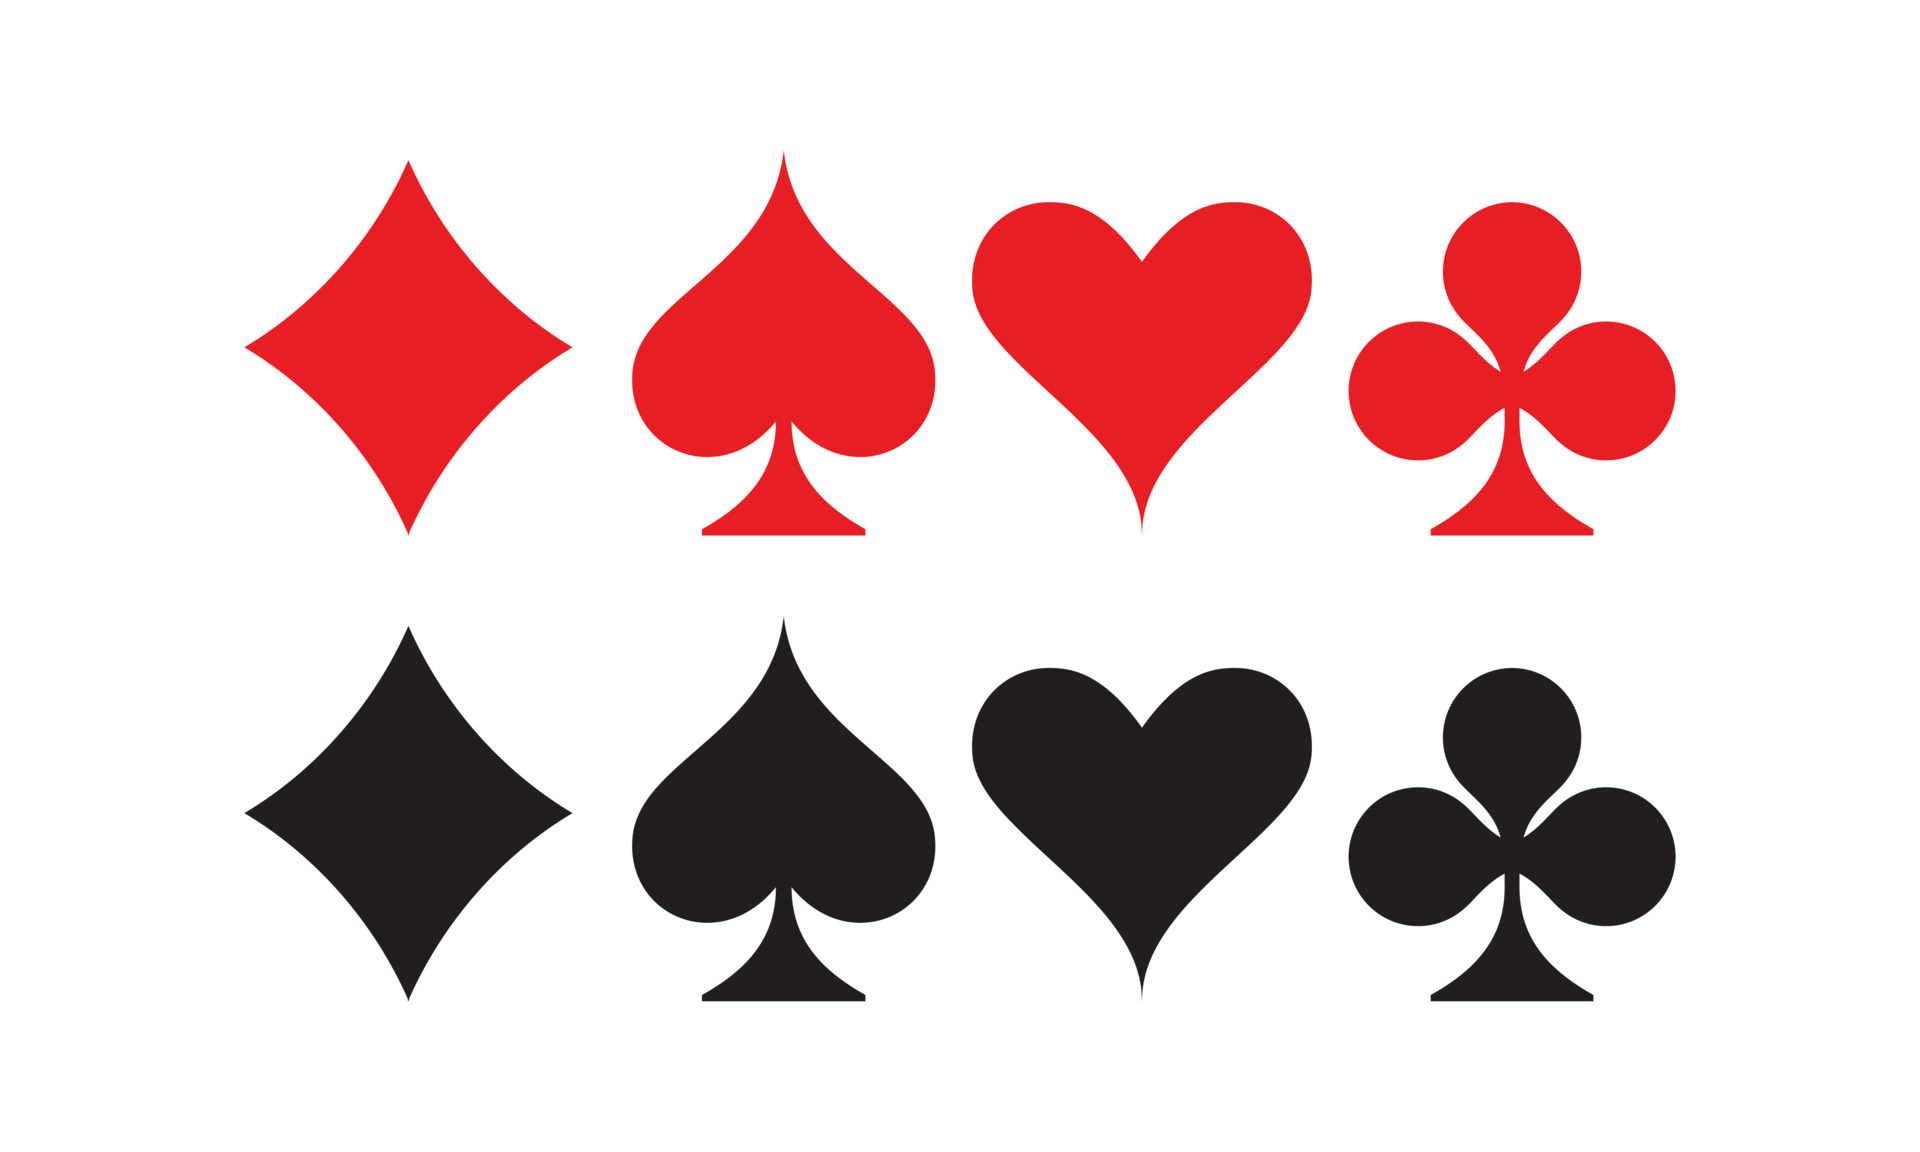 Flat vector illustration of playing card symbol set. Suitable for ...